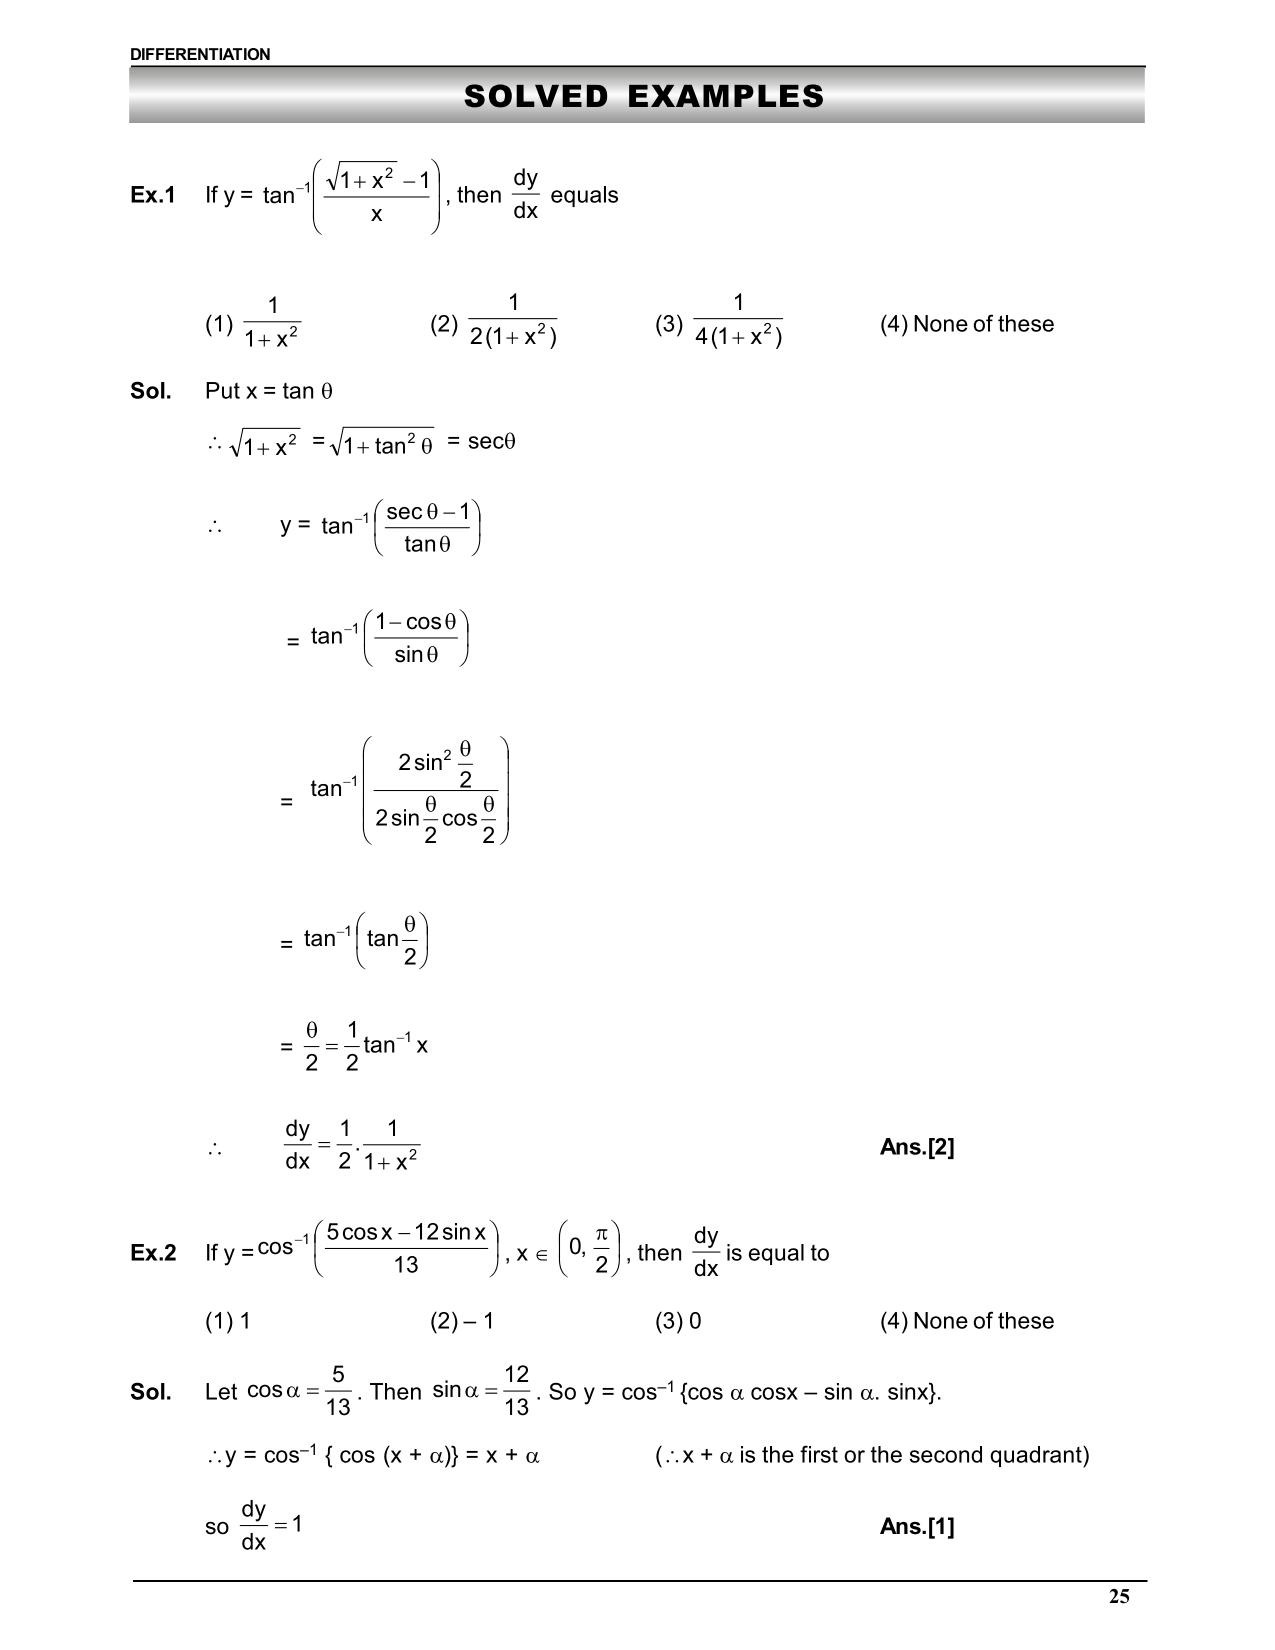 Continuity and Differentiability Class 12 Notes: Solved Examples